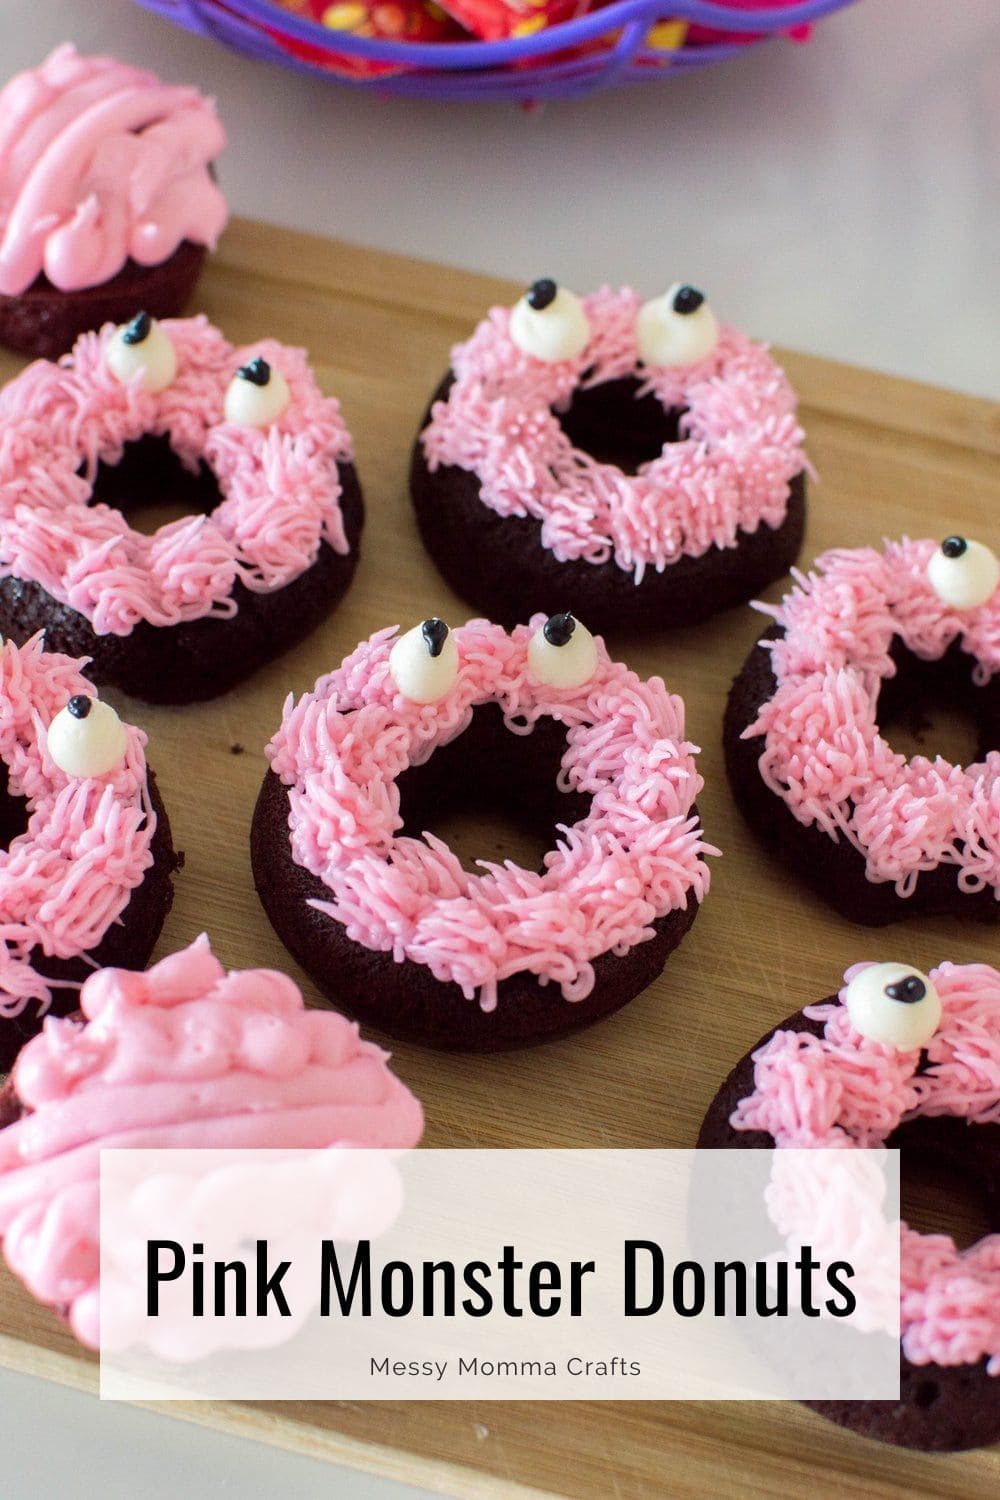 Pink monster donuts made from chocolate doughnuts and pink frosting.